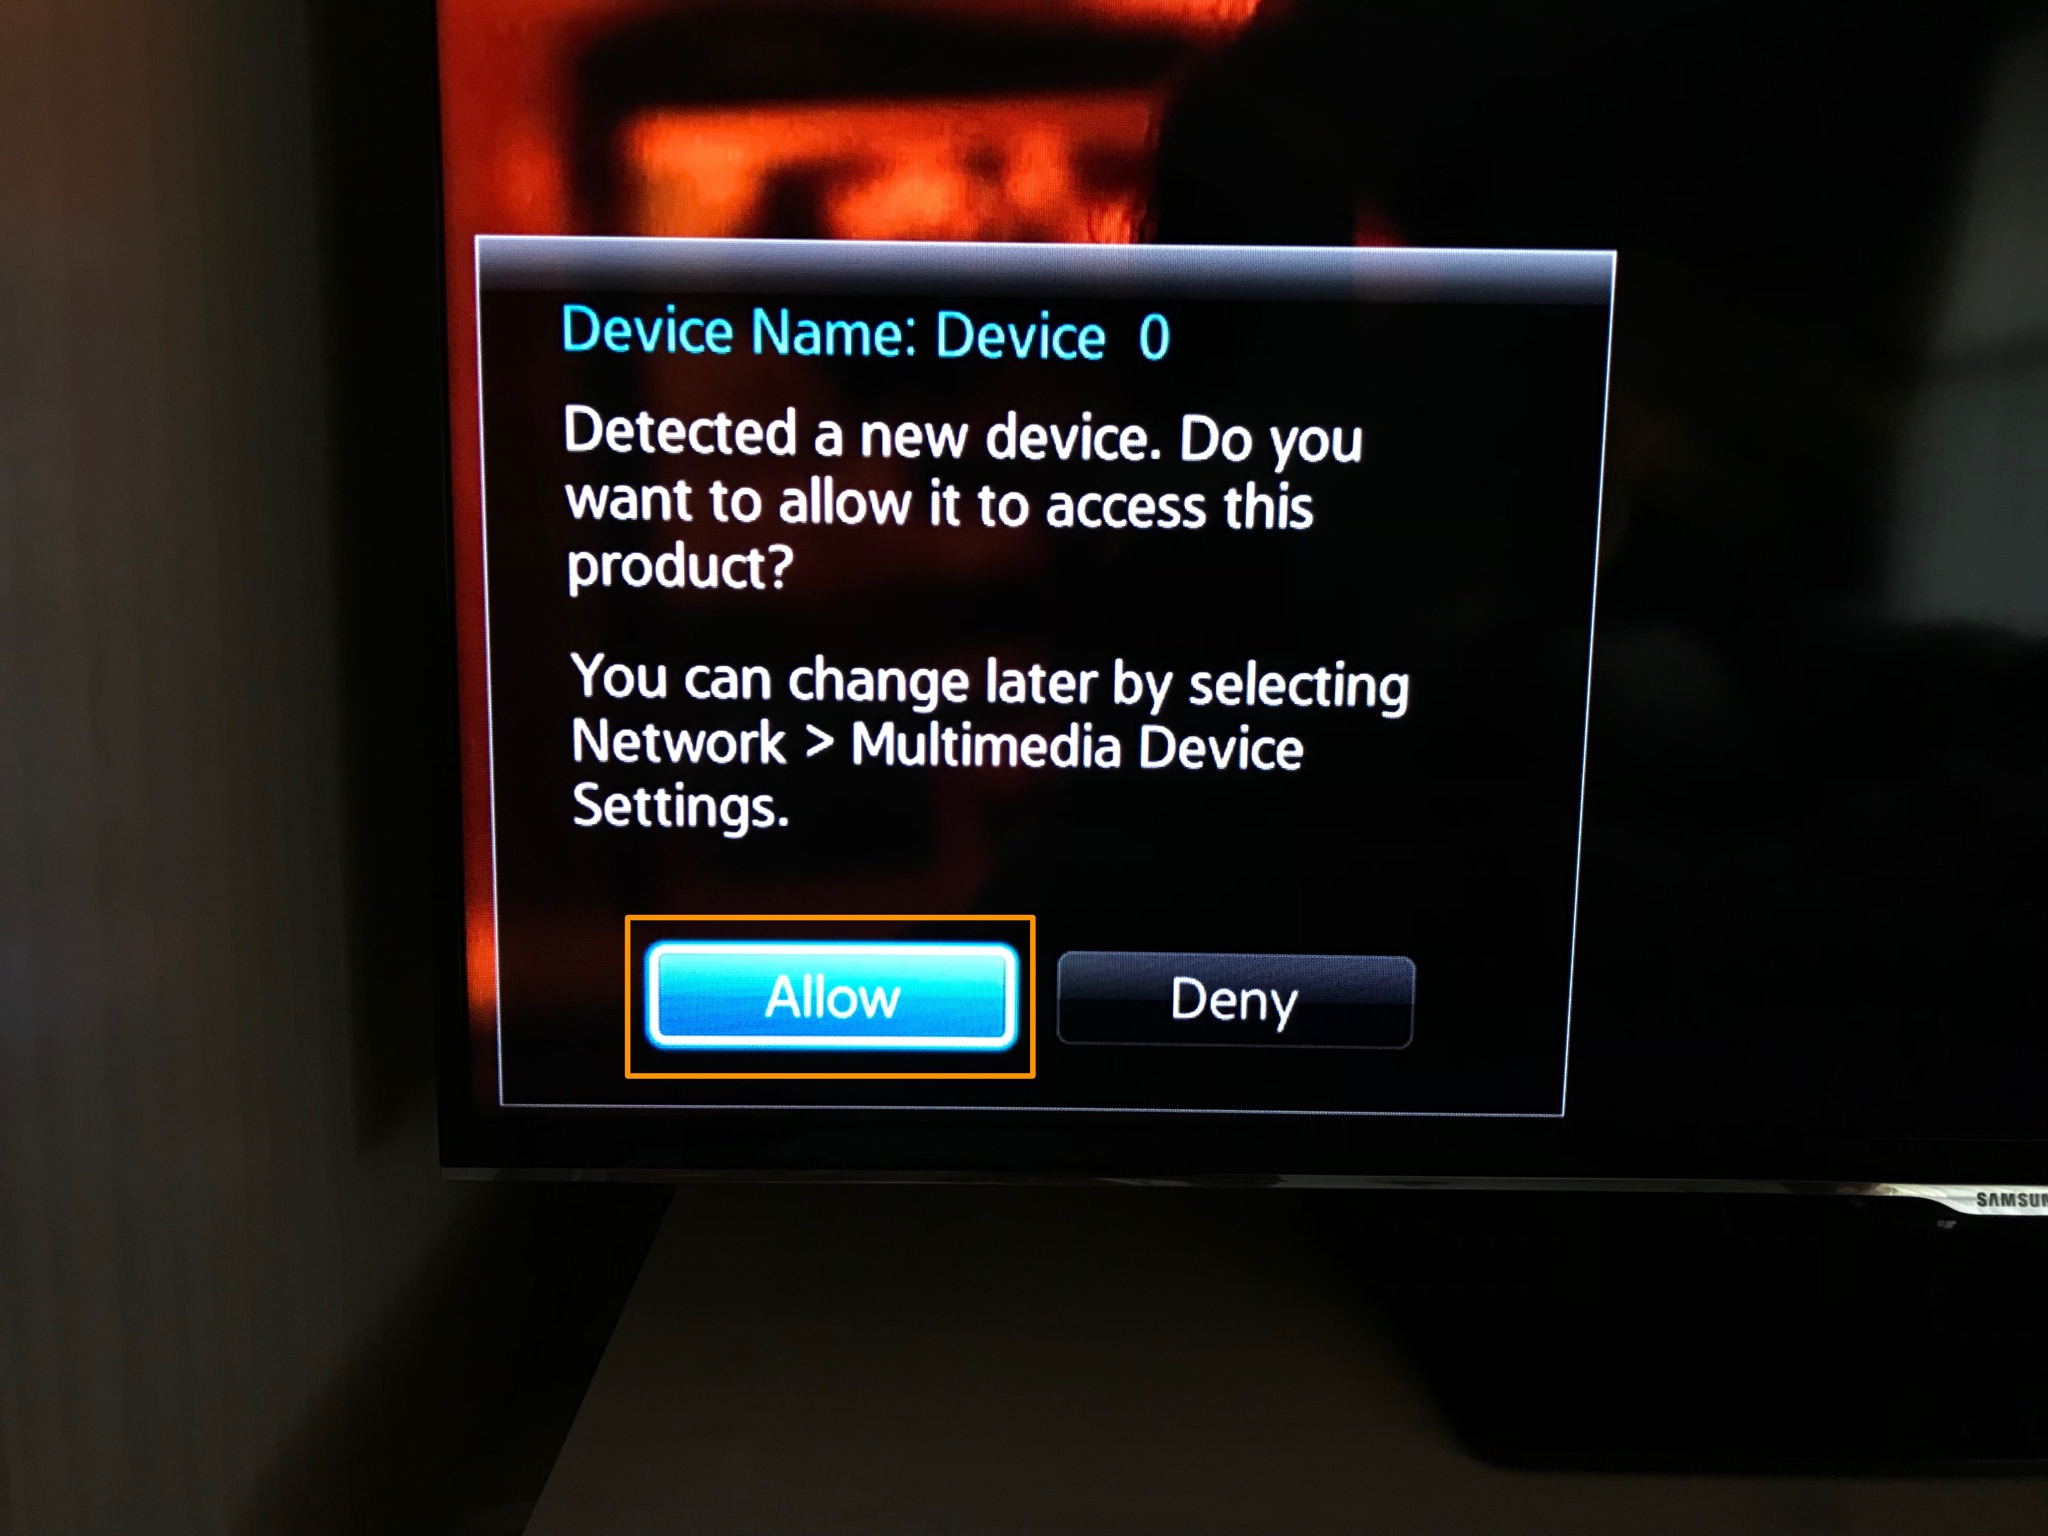 Mirror Your Iphone Or Ipad On A Smart Tv, How To Mirror From Ipad Samsung Tv